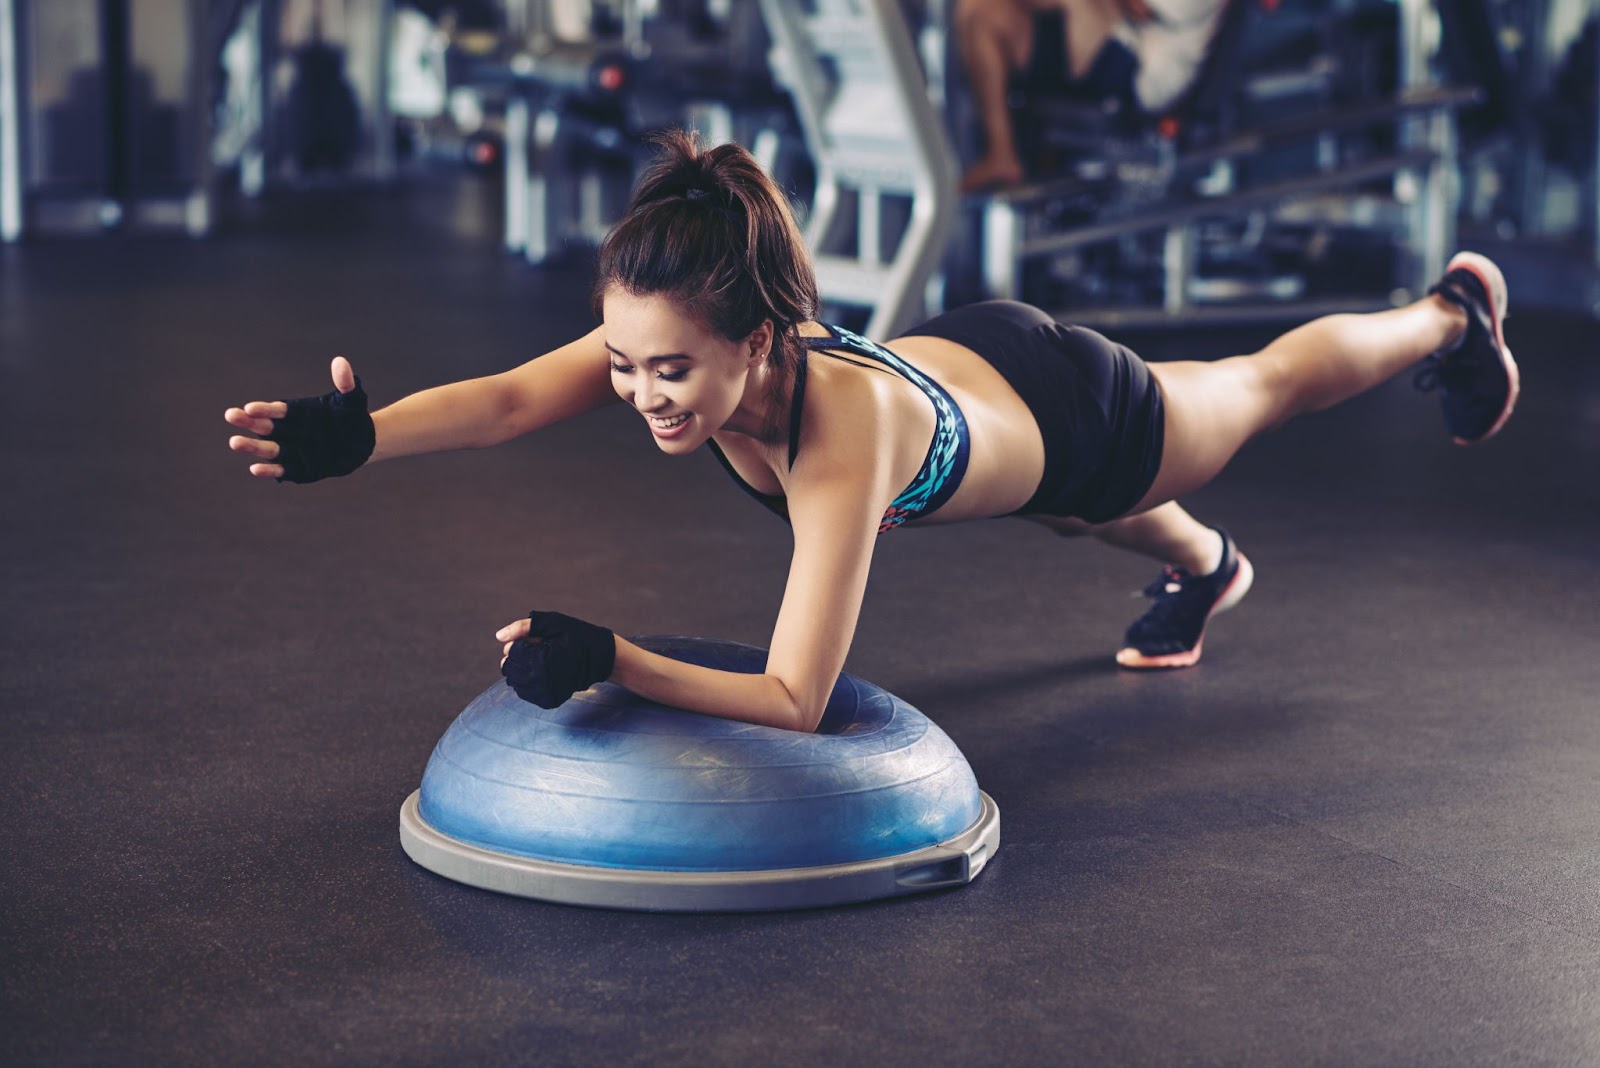 Fit woman working out on a BOSU ball at a gym